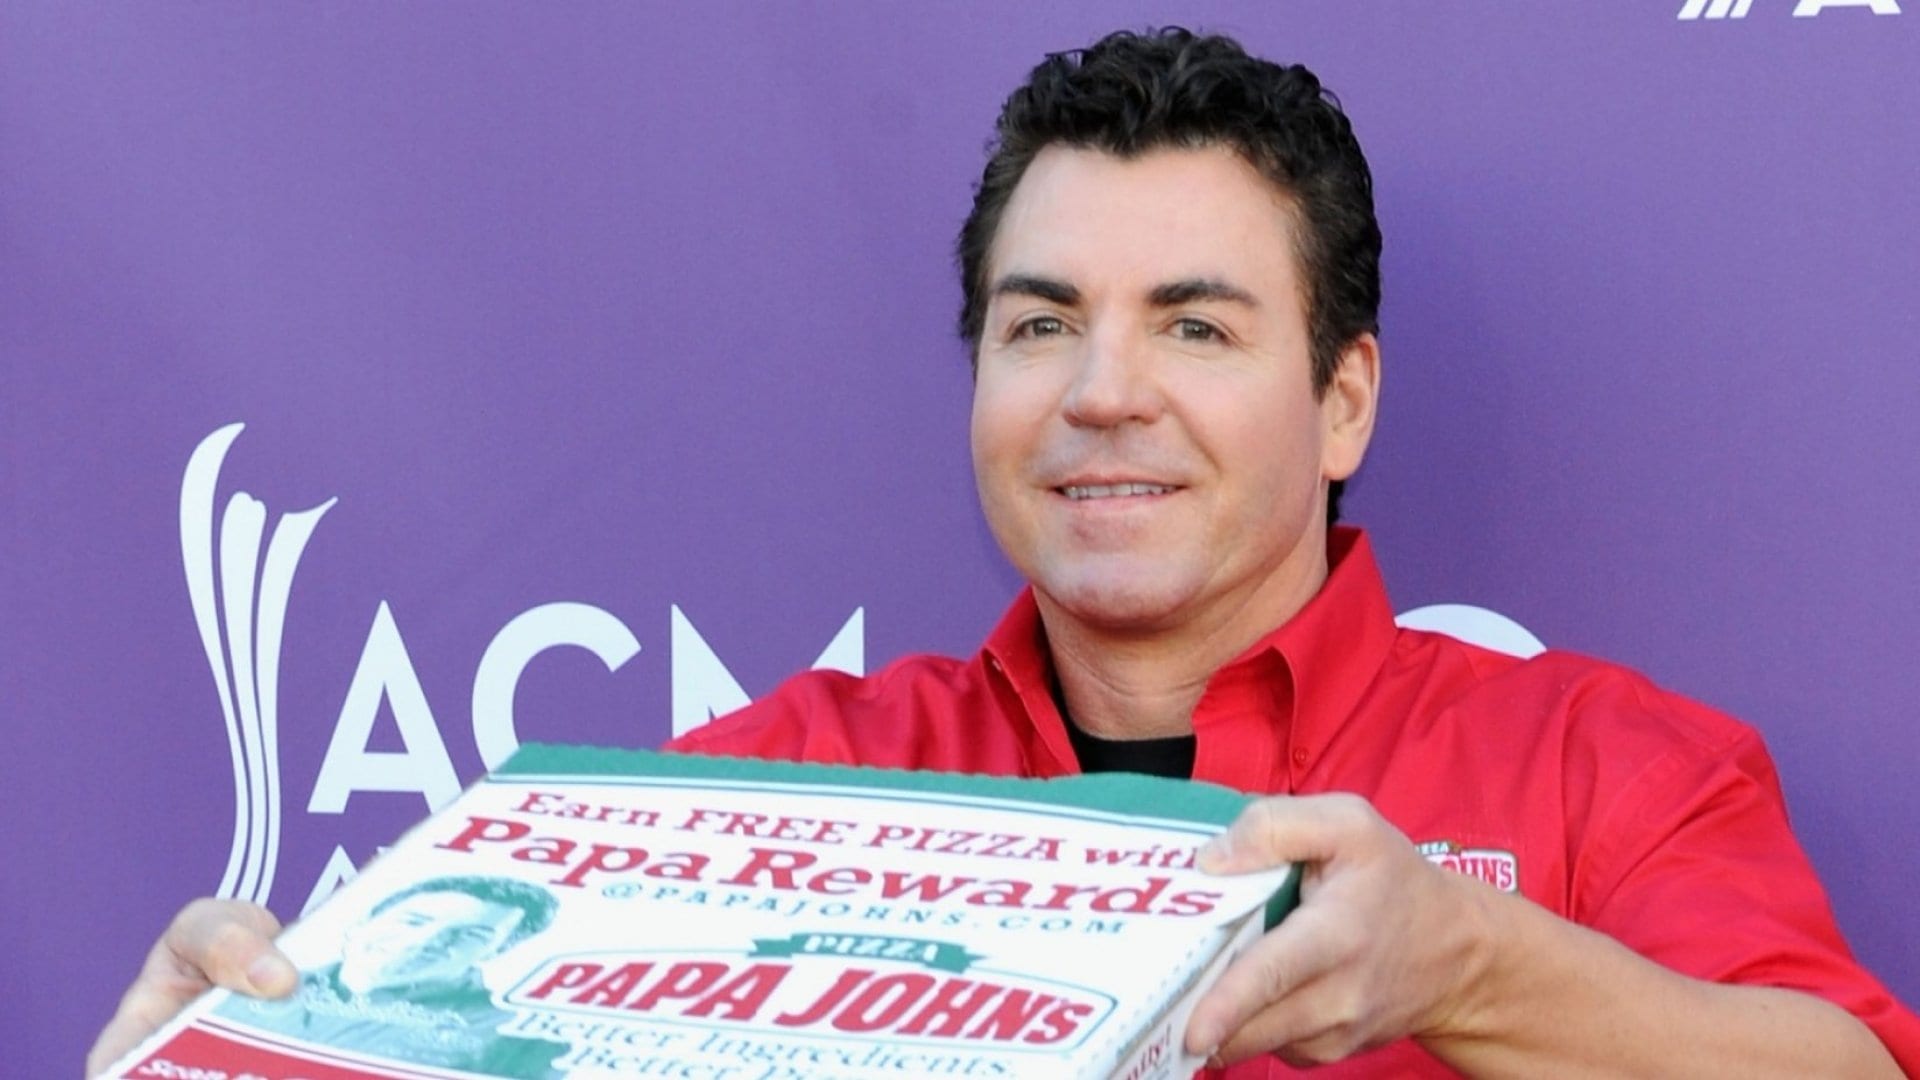 Papa John’s Founder Implores He’s Not Racist, Claims It Was The Aim To ‘Get Rid of This N-Word in My Vocabulary’